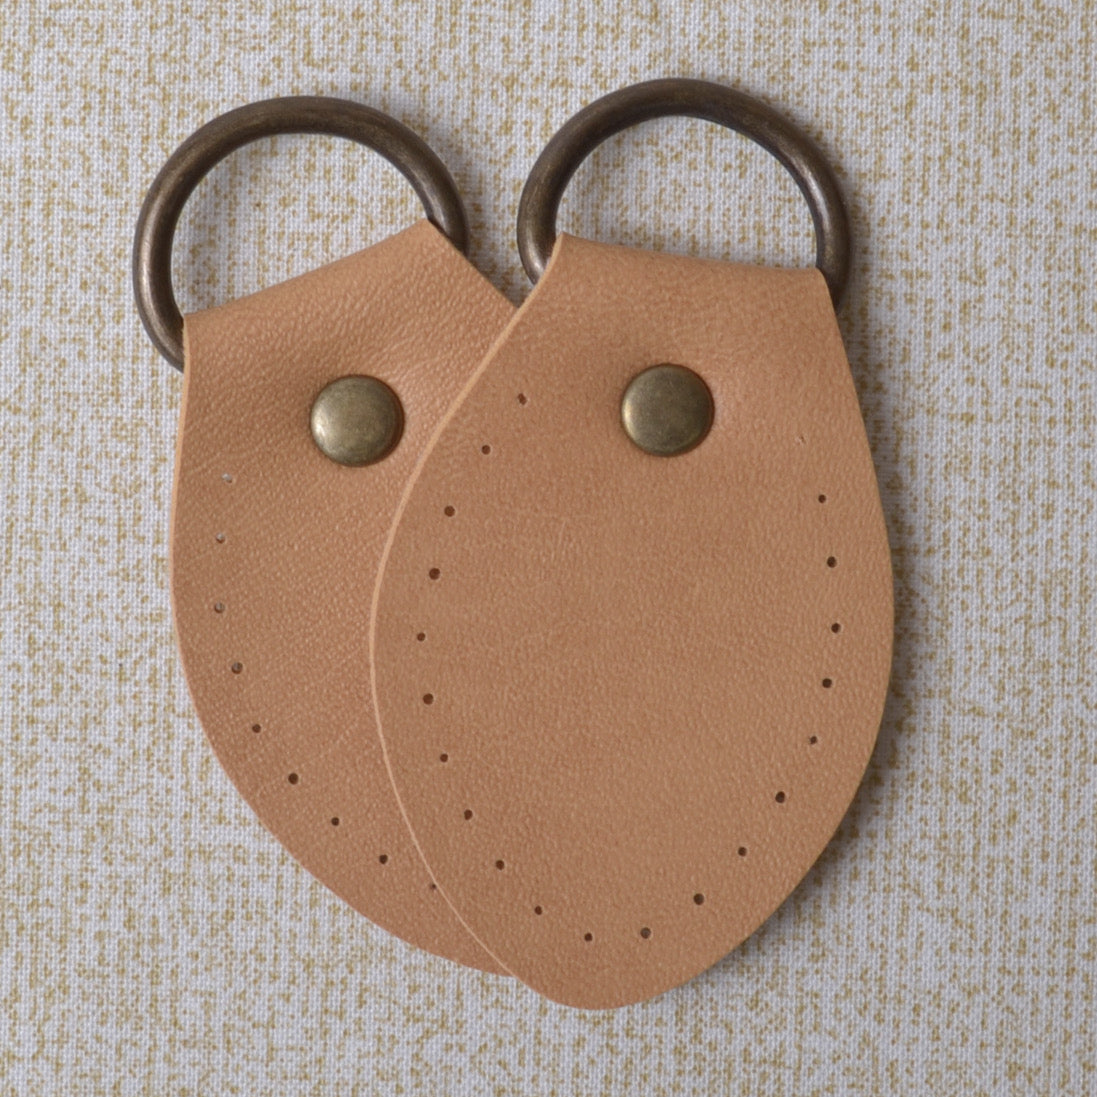 leather attachment for bag making